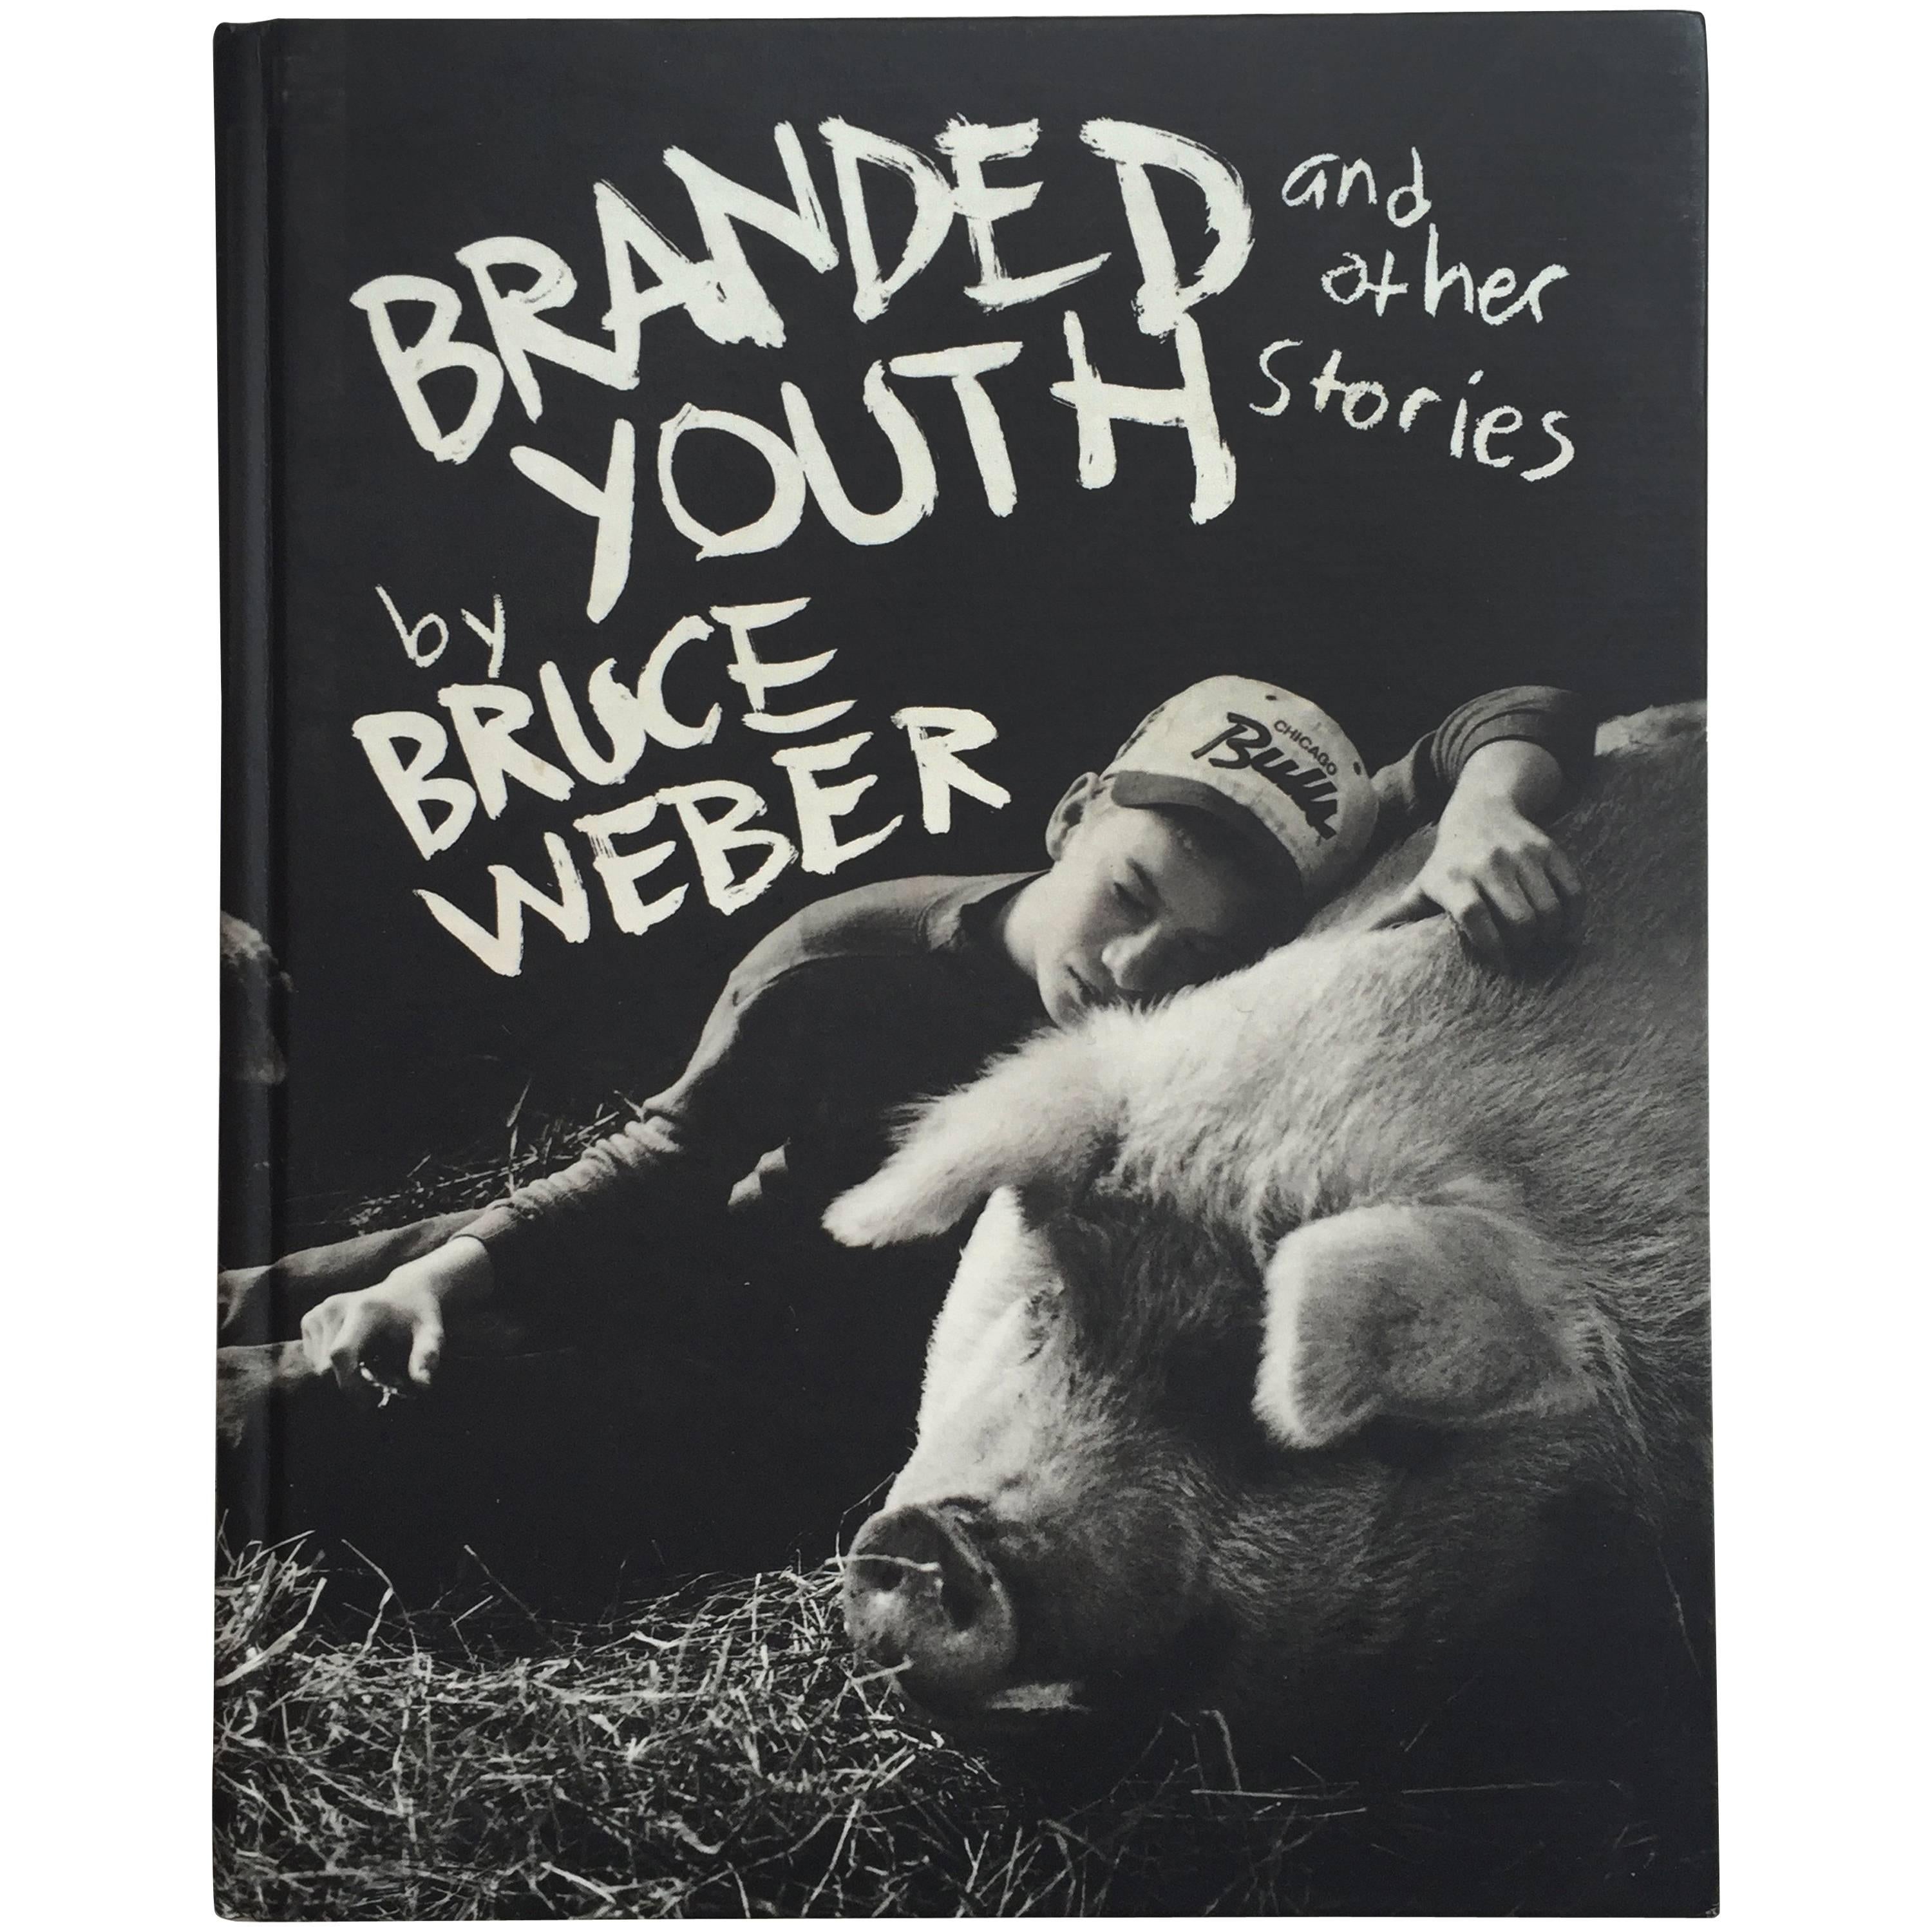 Branded Youth and Other Stories - Bruce Weber Book First Edition 1997